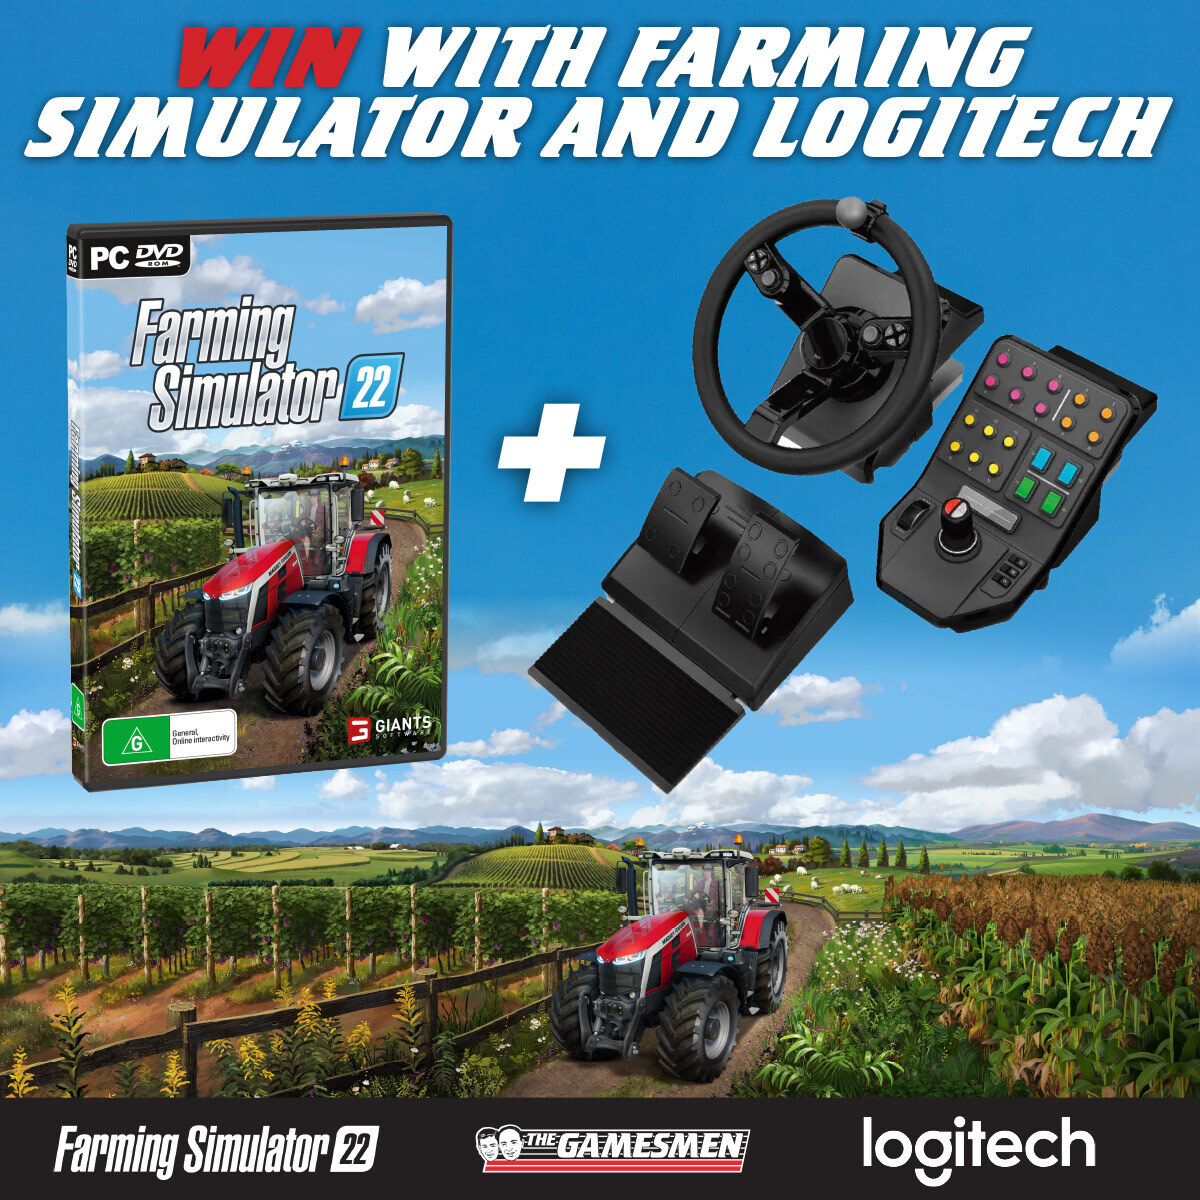 The Gamesmen on X: To celebrate the launch of Farming Simulator 22, we are  giving away Farming Simulator 22 & Logitech Heavy Equipment PC Bundle. To  enter, let us know why you